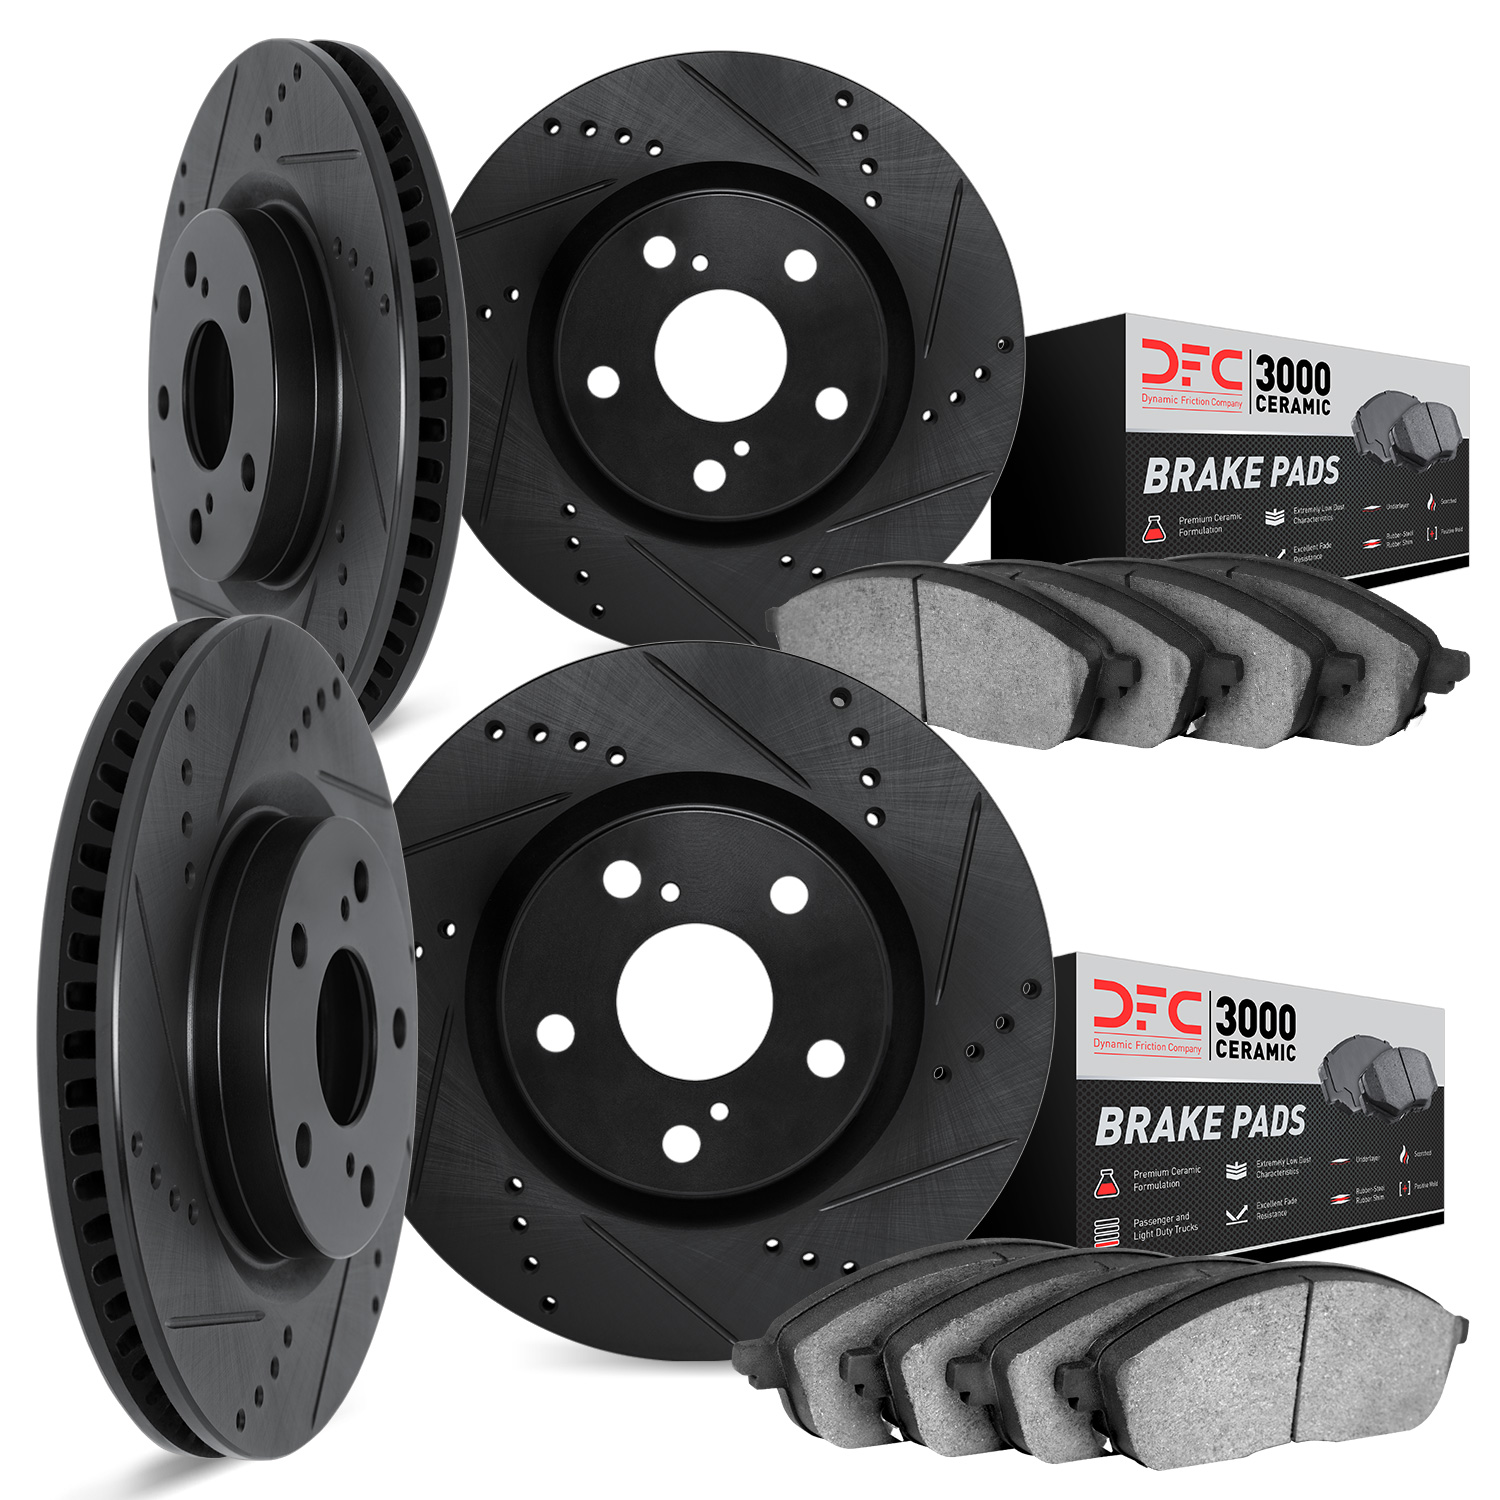 8304-27060 Drilled/Slotted Brake Rotors with 3000-Series Ceramic Brake Pads Kit [Black], 2007-2015 Volvo, Position: Front and Re